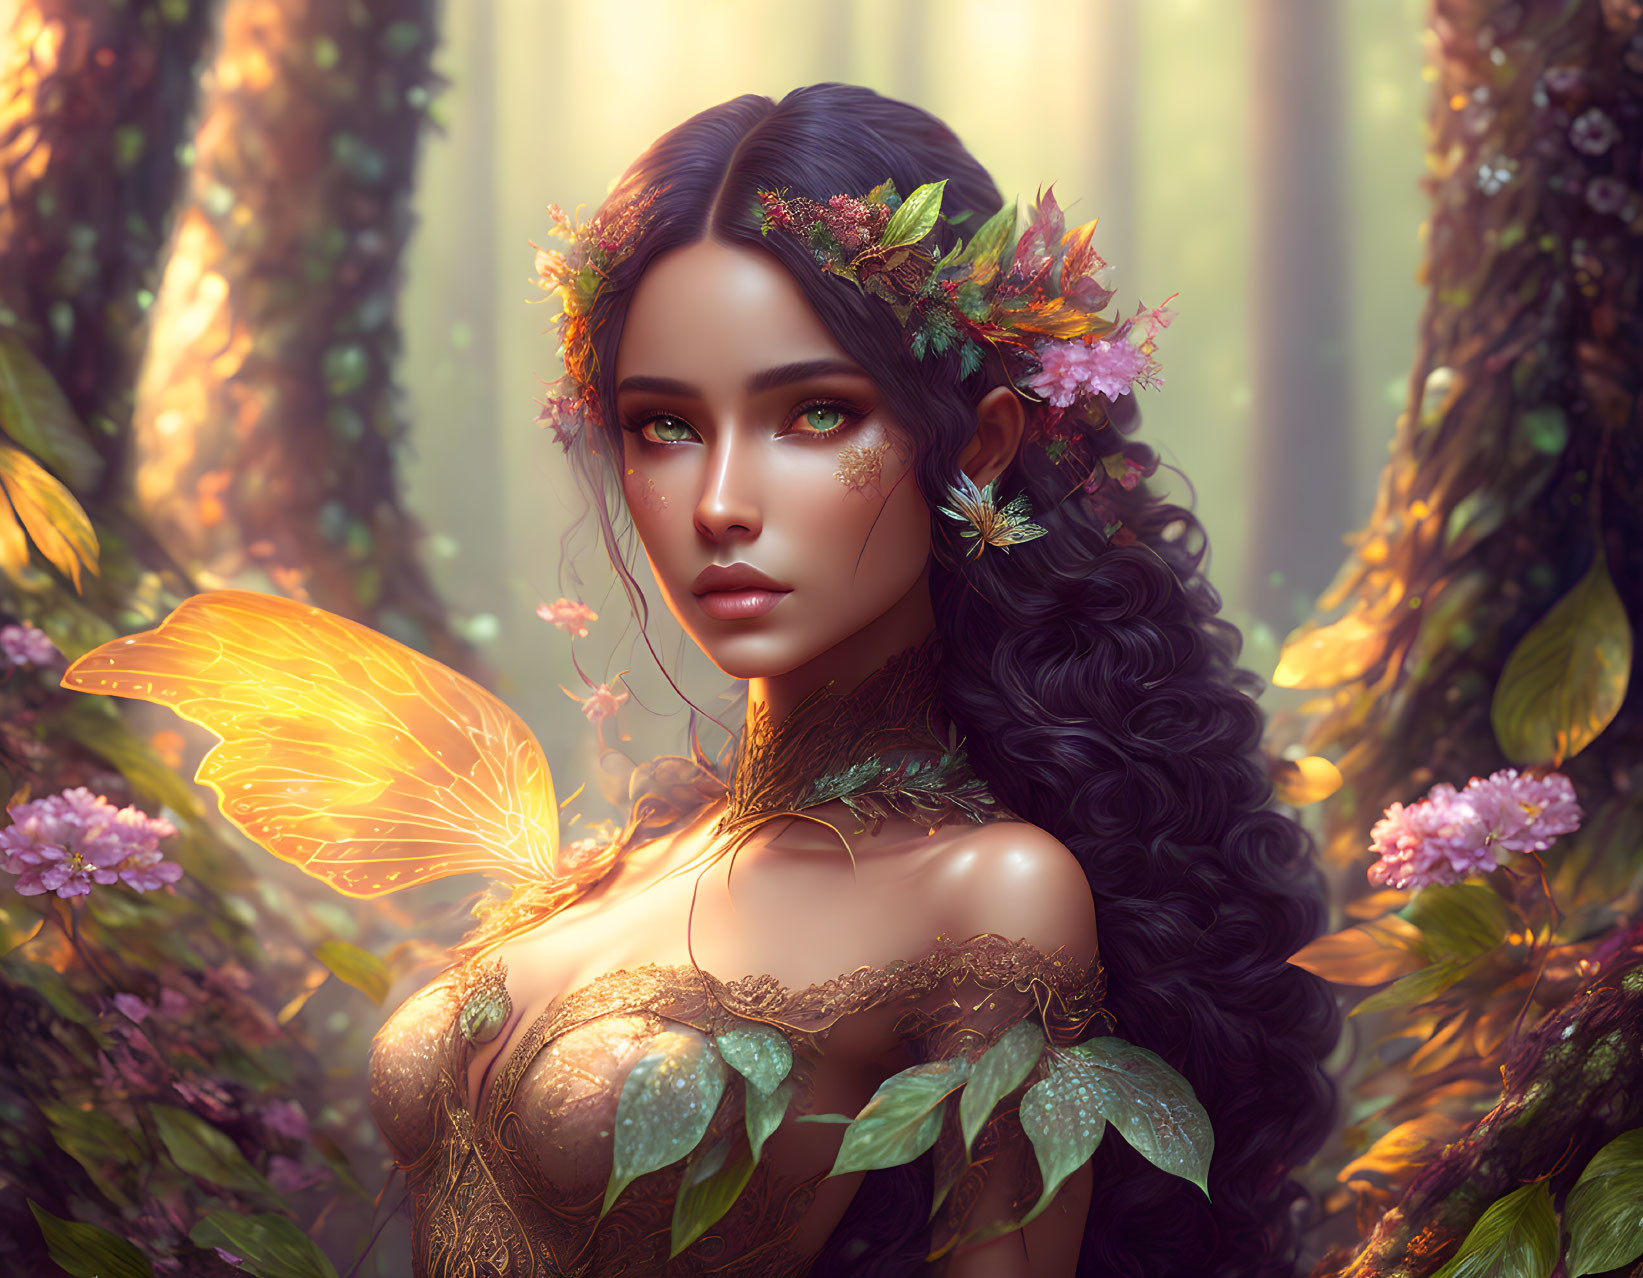 Digital art: Woman with butterfly wings in forest wearing floral crown.